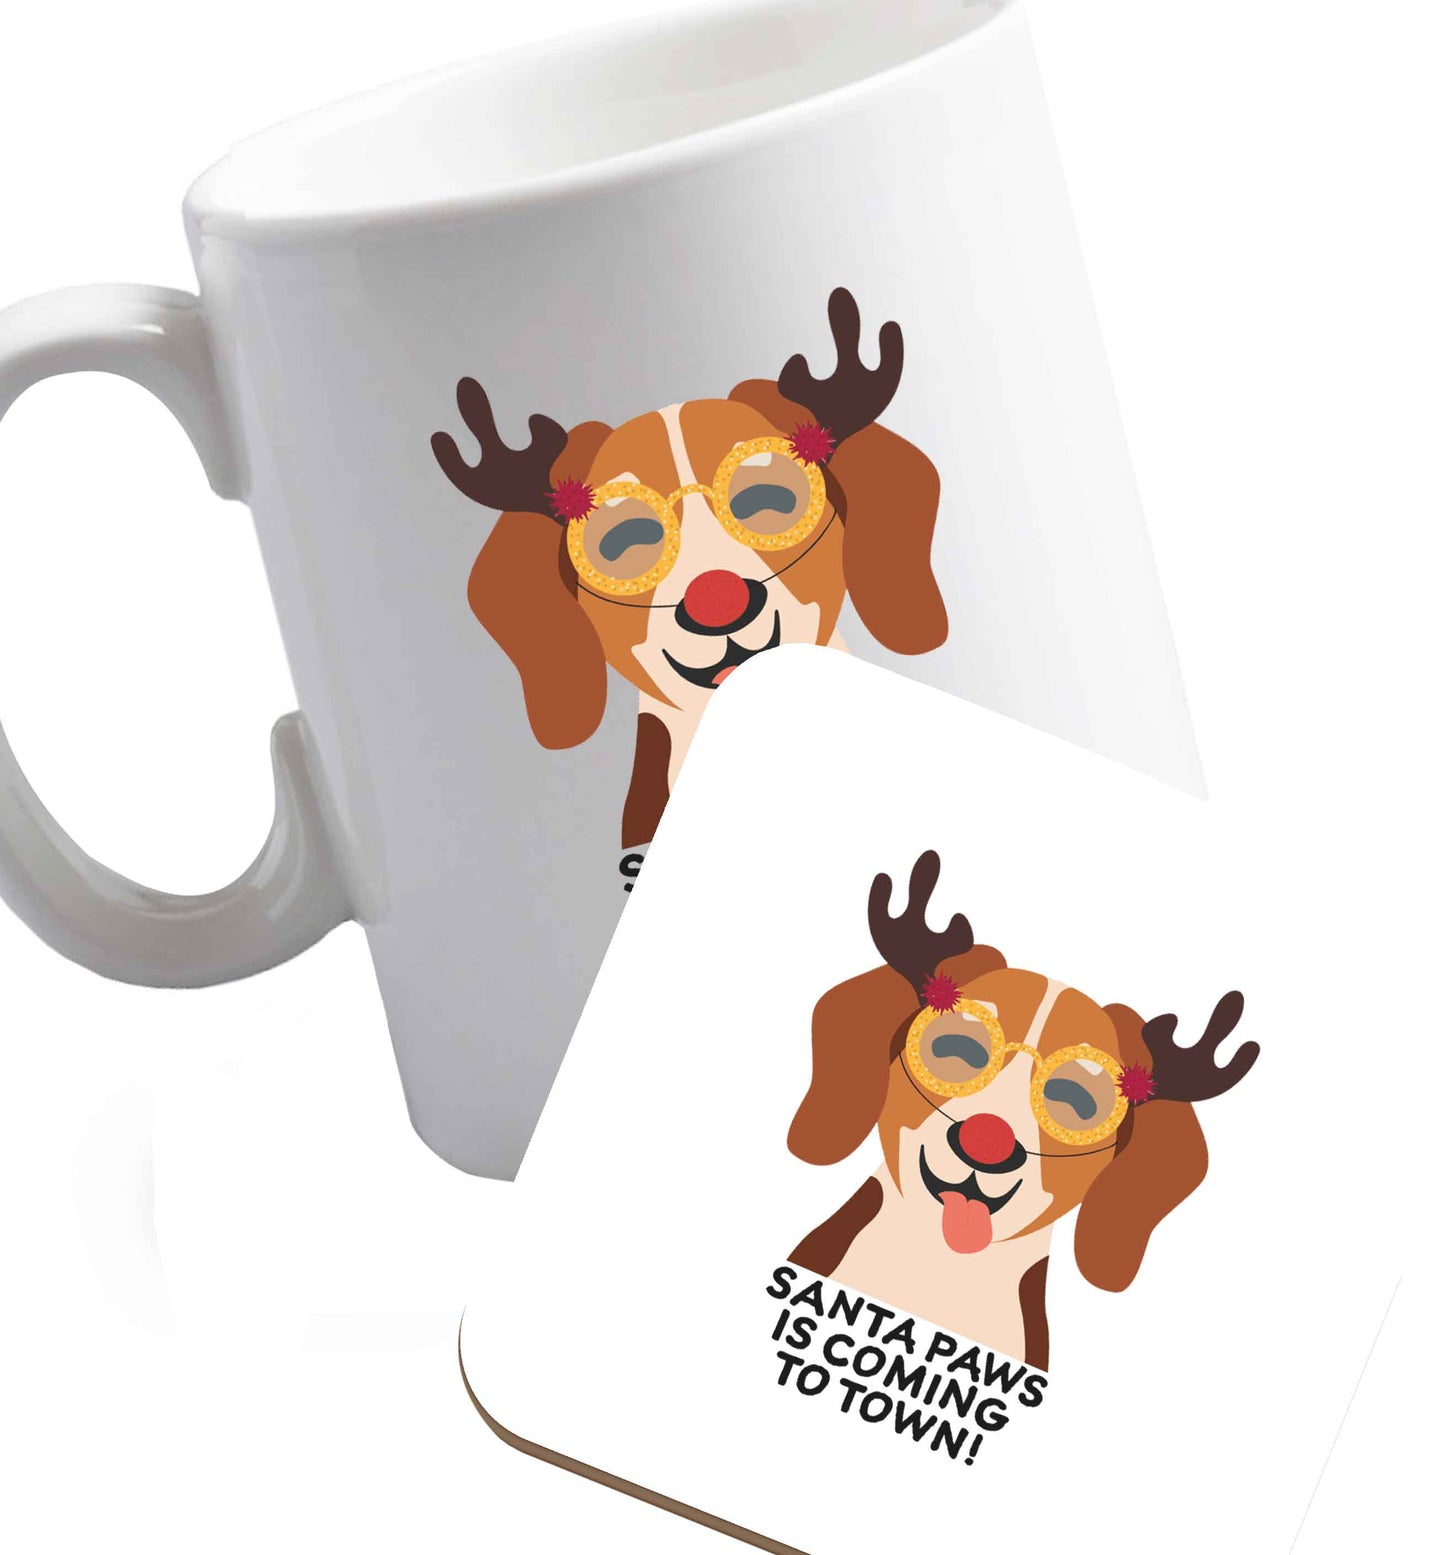 10 oz Santa paws is coming to town ceramic mug and coaster set right handed